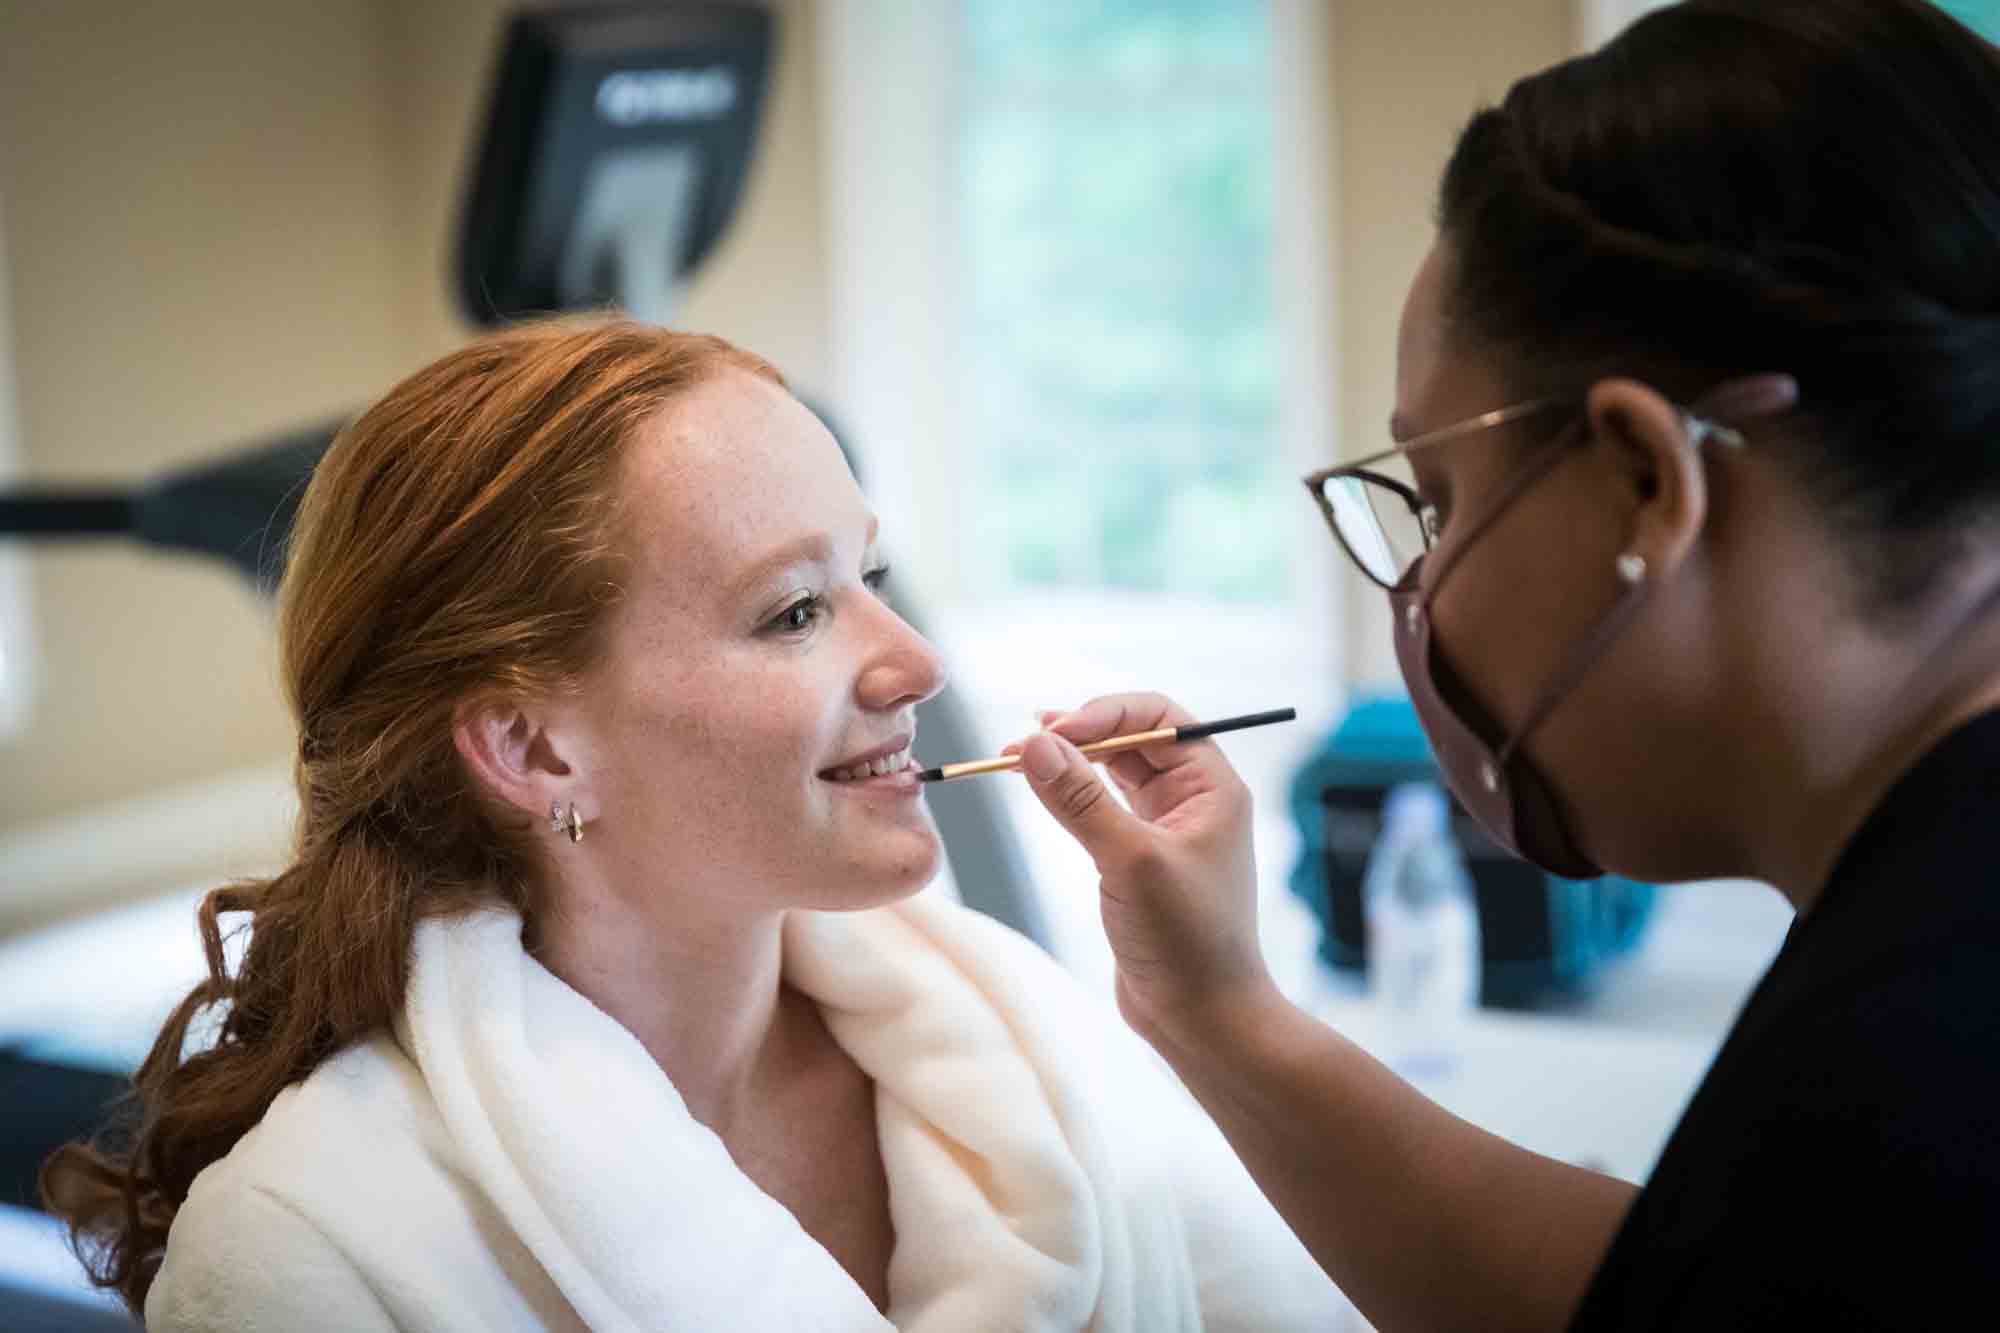 Woman with red hair wearing robe having lipstick applied